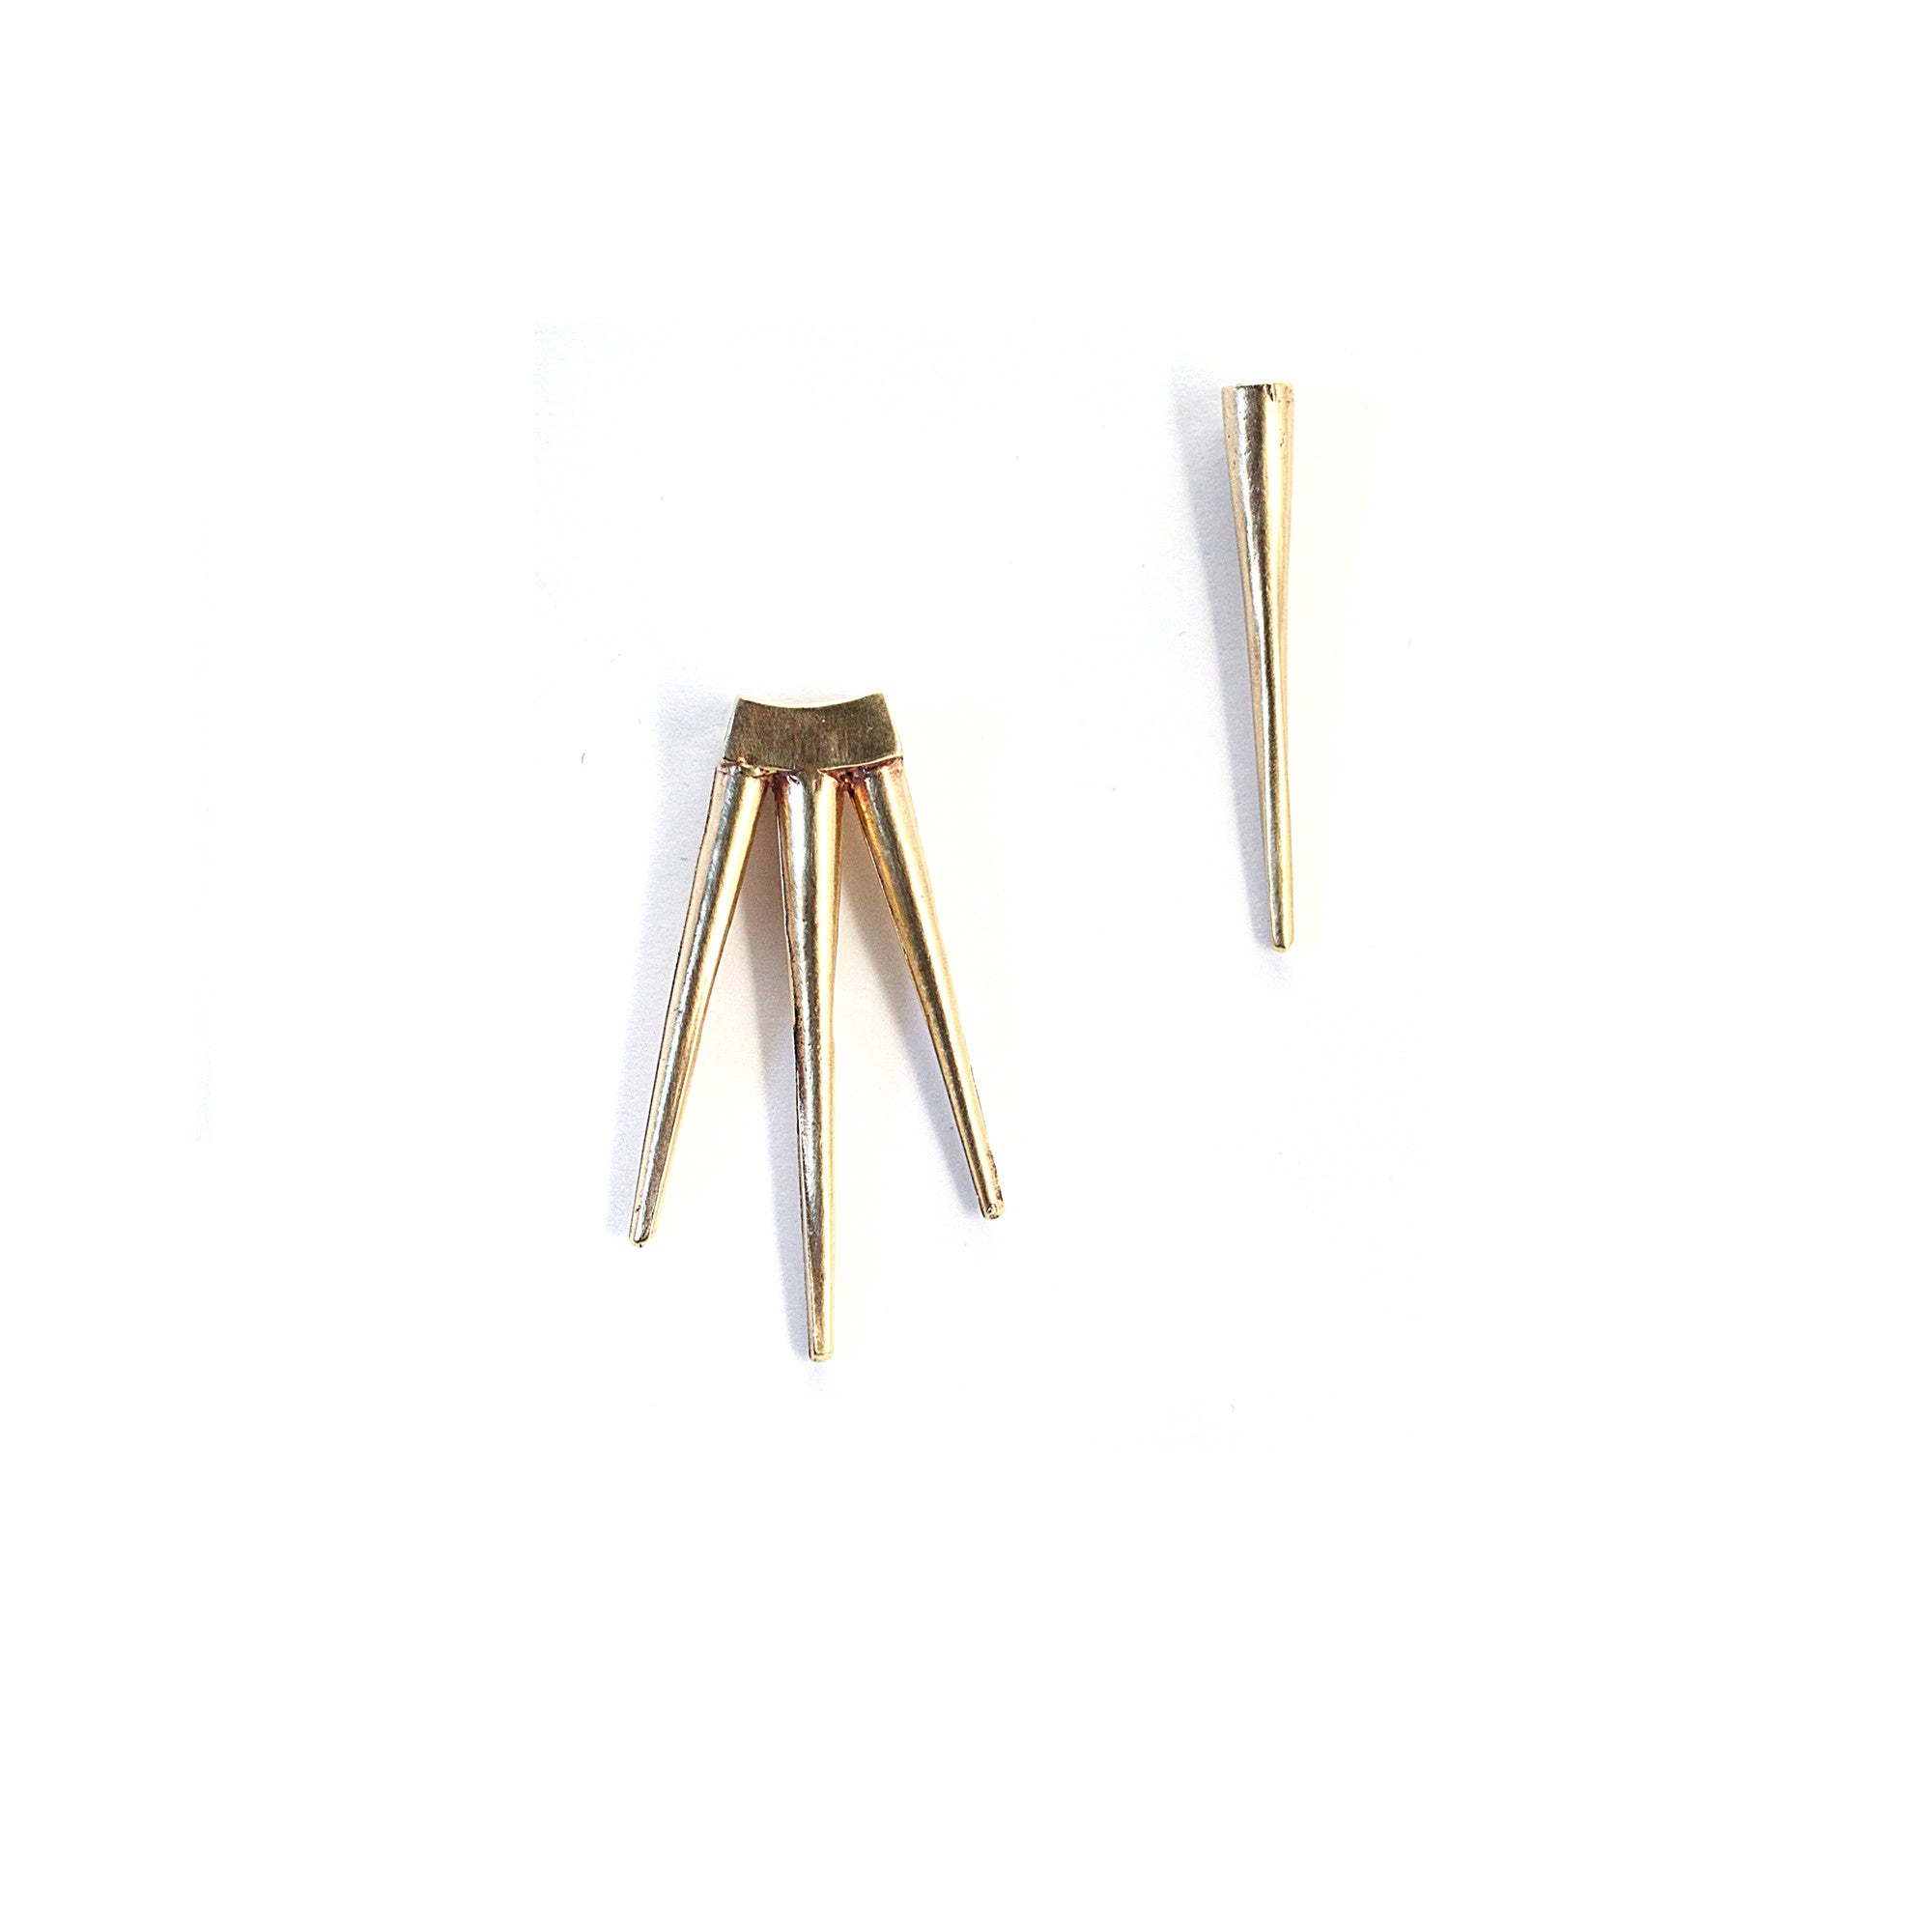 Single Spike / Small Quill Burst Earrings Brass - K/LLER COLLECTION